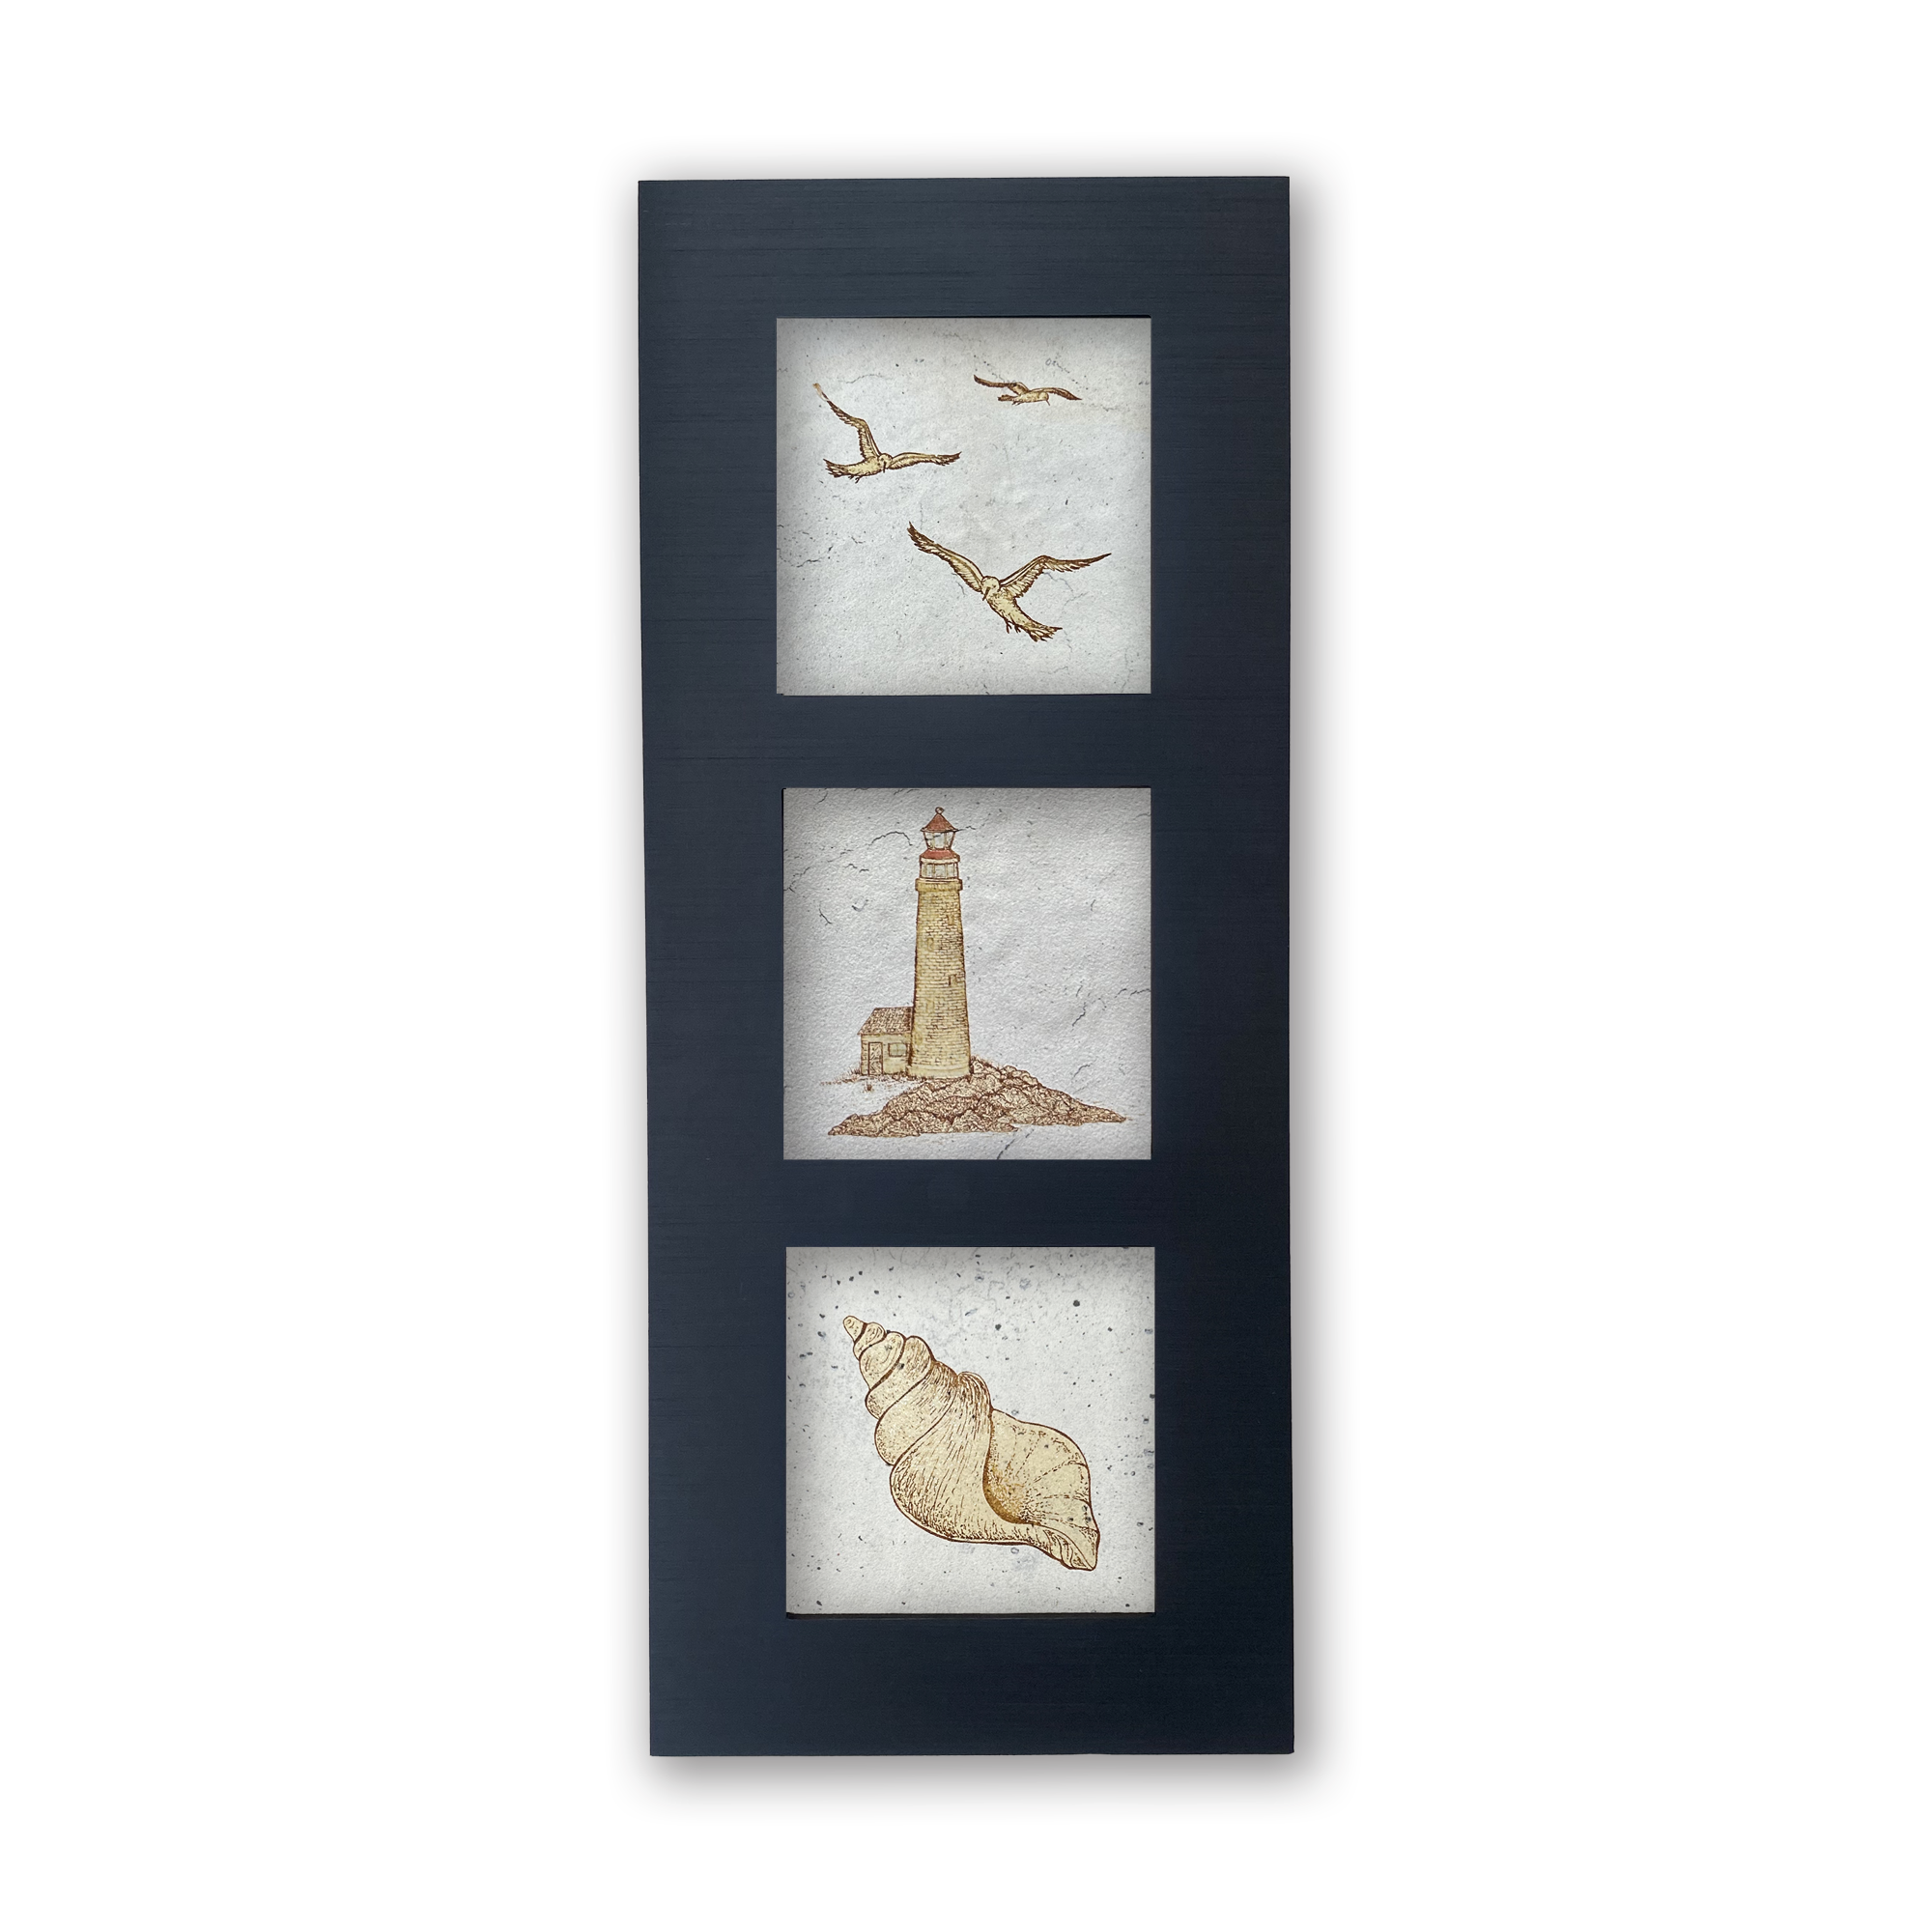 A trio of coastal images created on beige porcelain tile mounted in an anodized aluminum frame